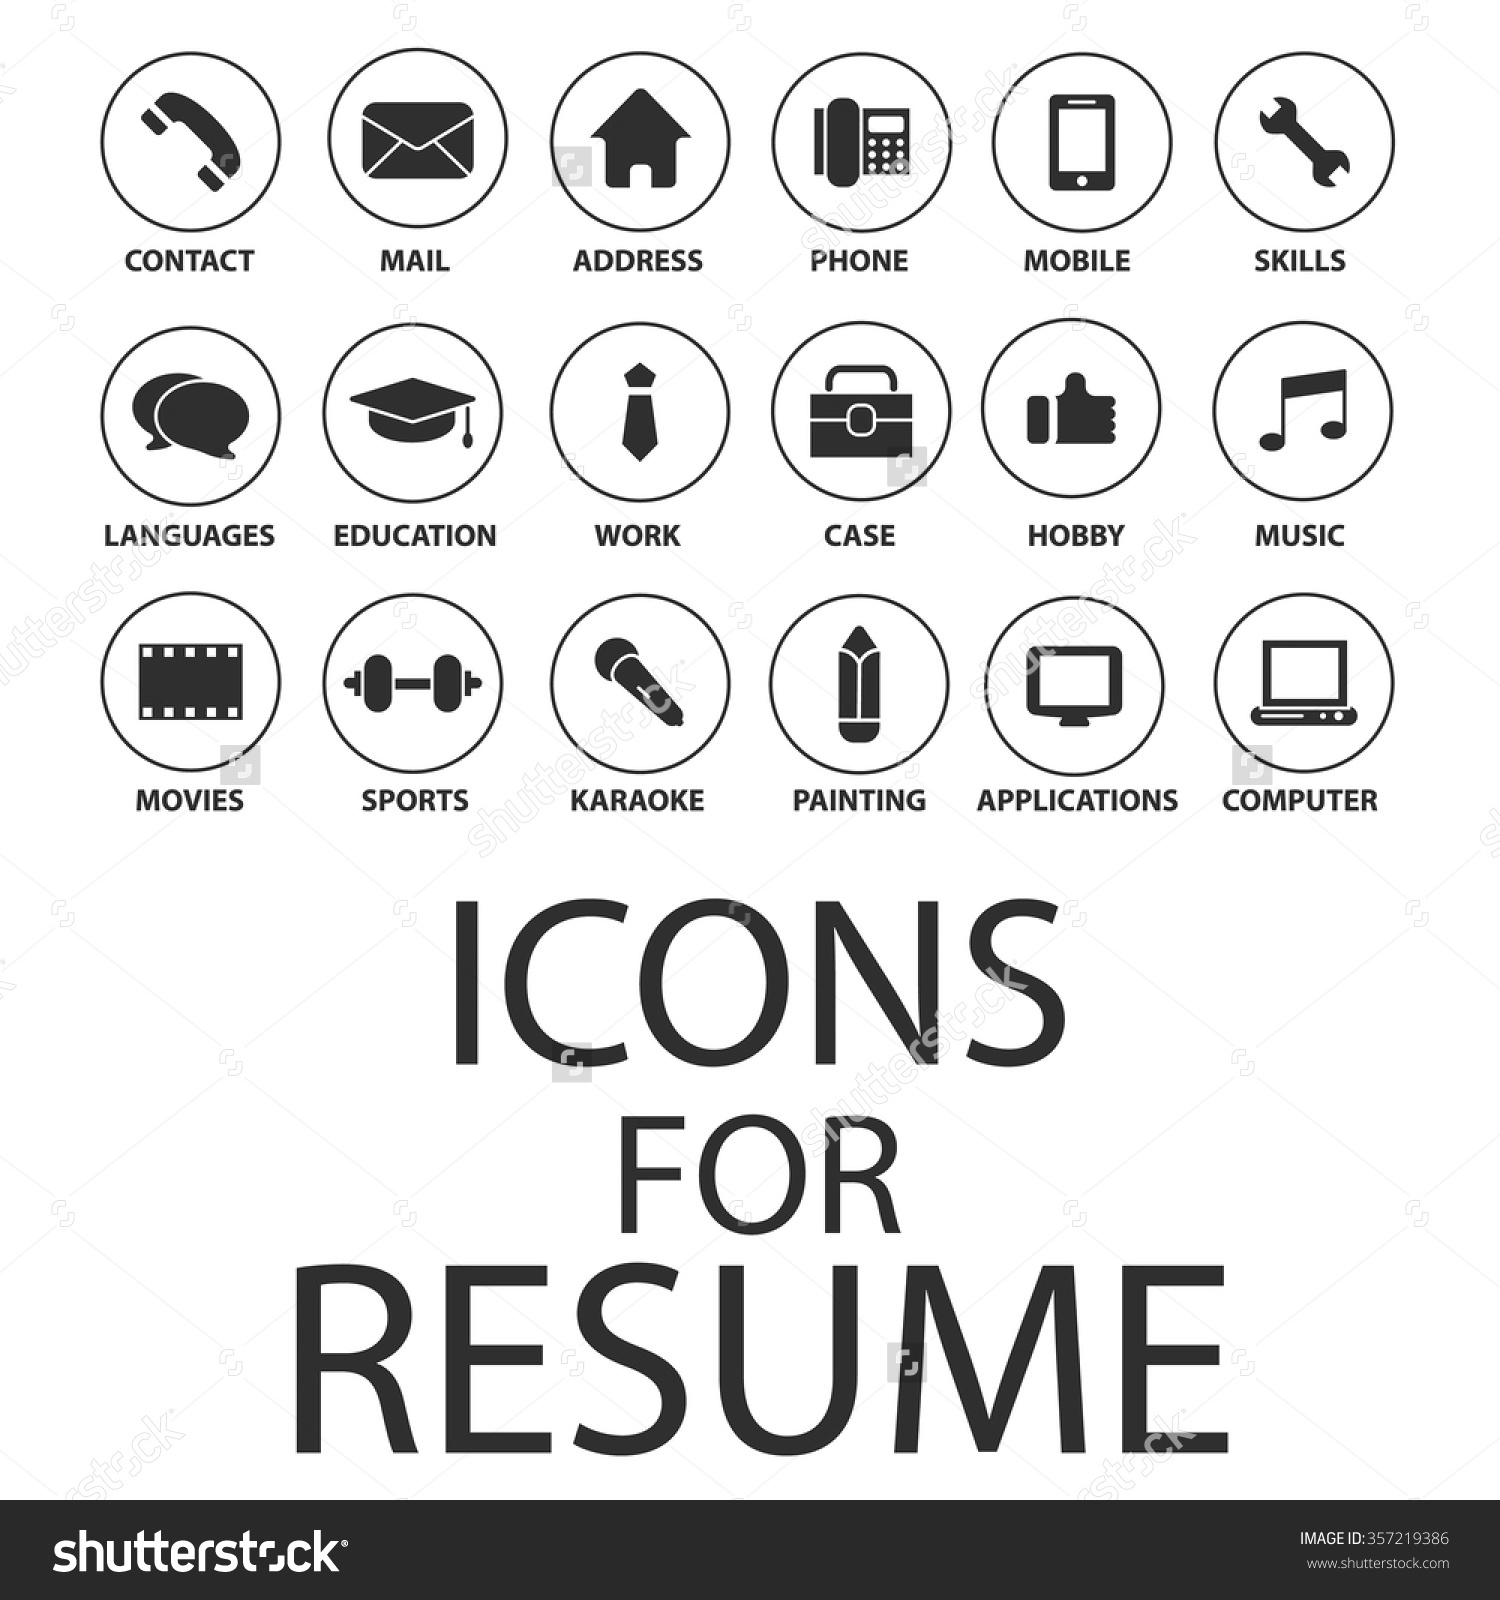 resume-icons-vector-at-vectorified-collection-of-resume-icons